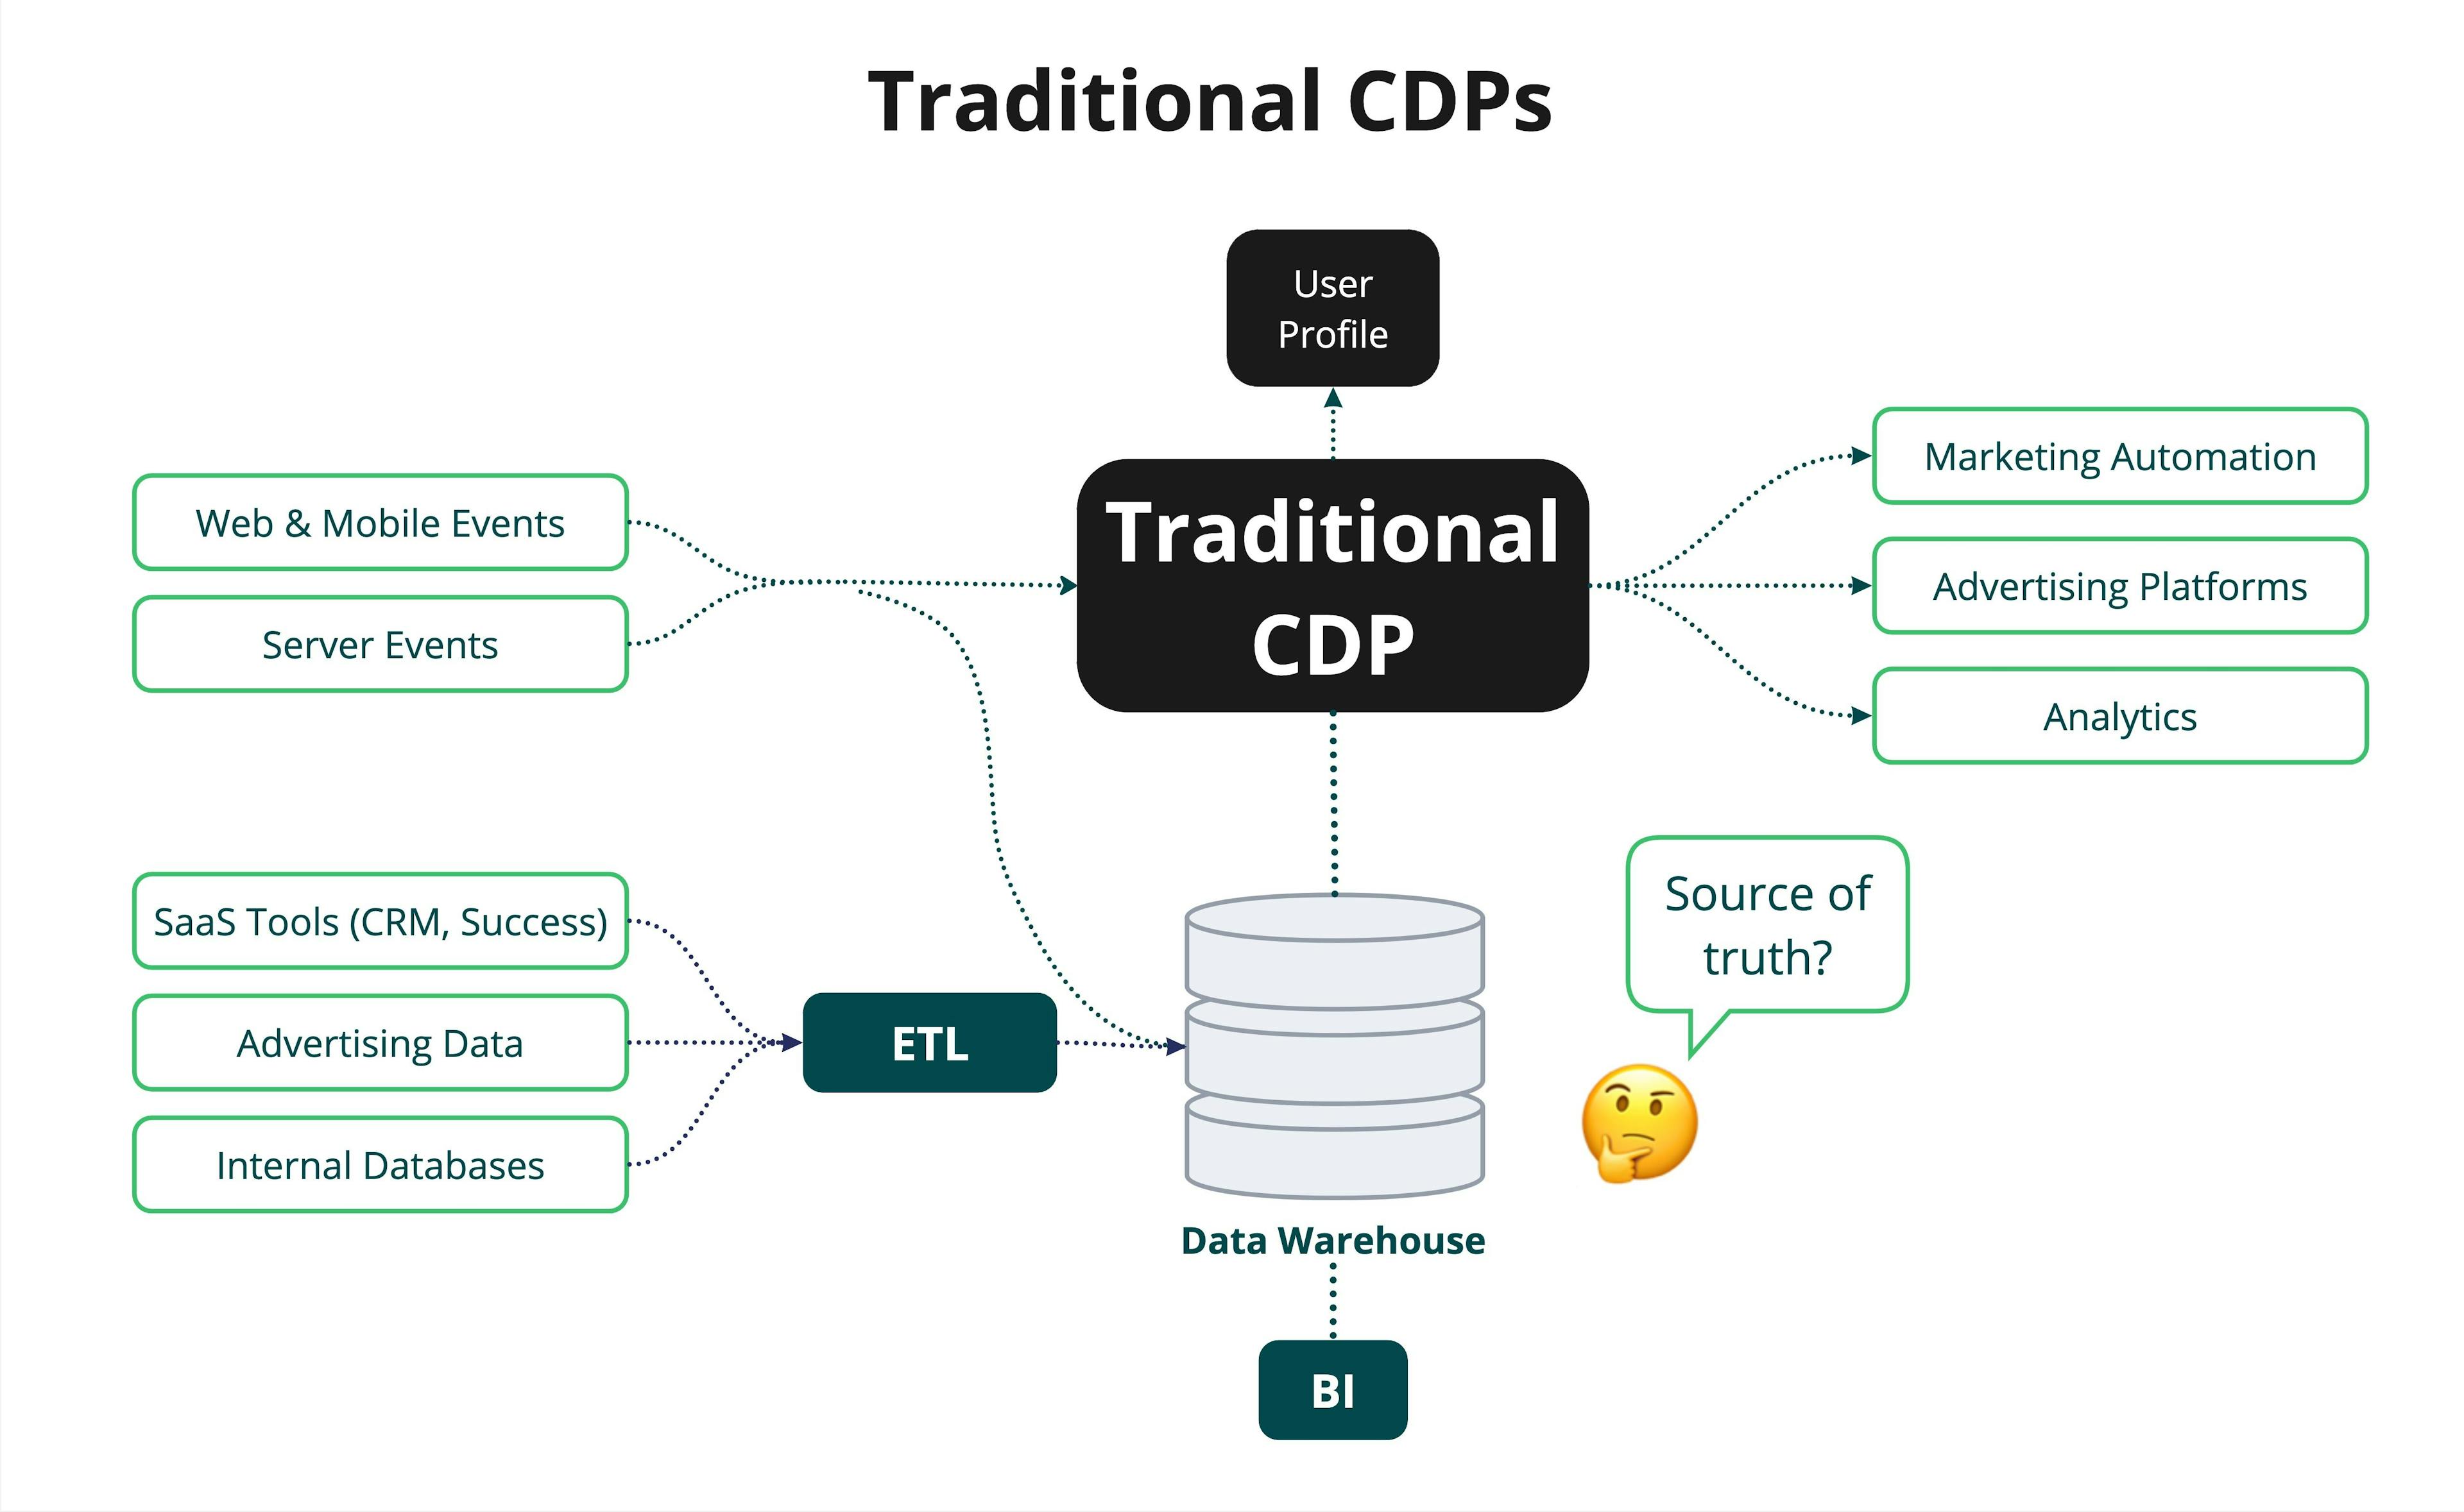 Traditional CDPs